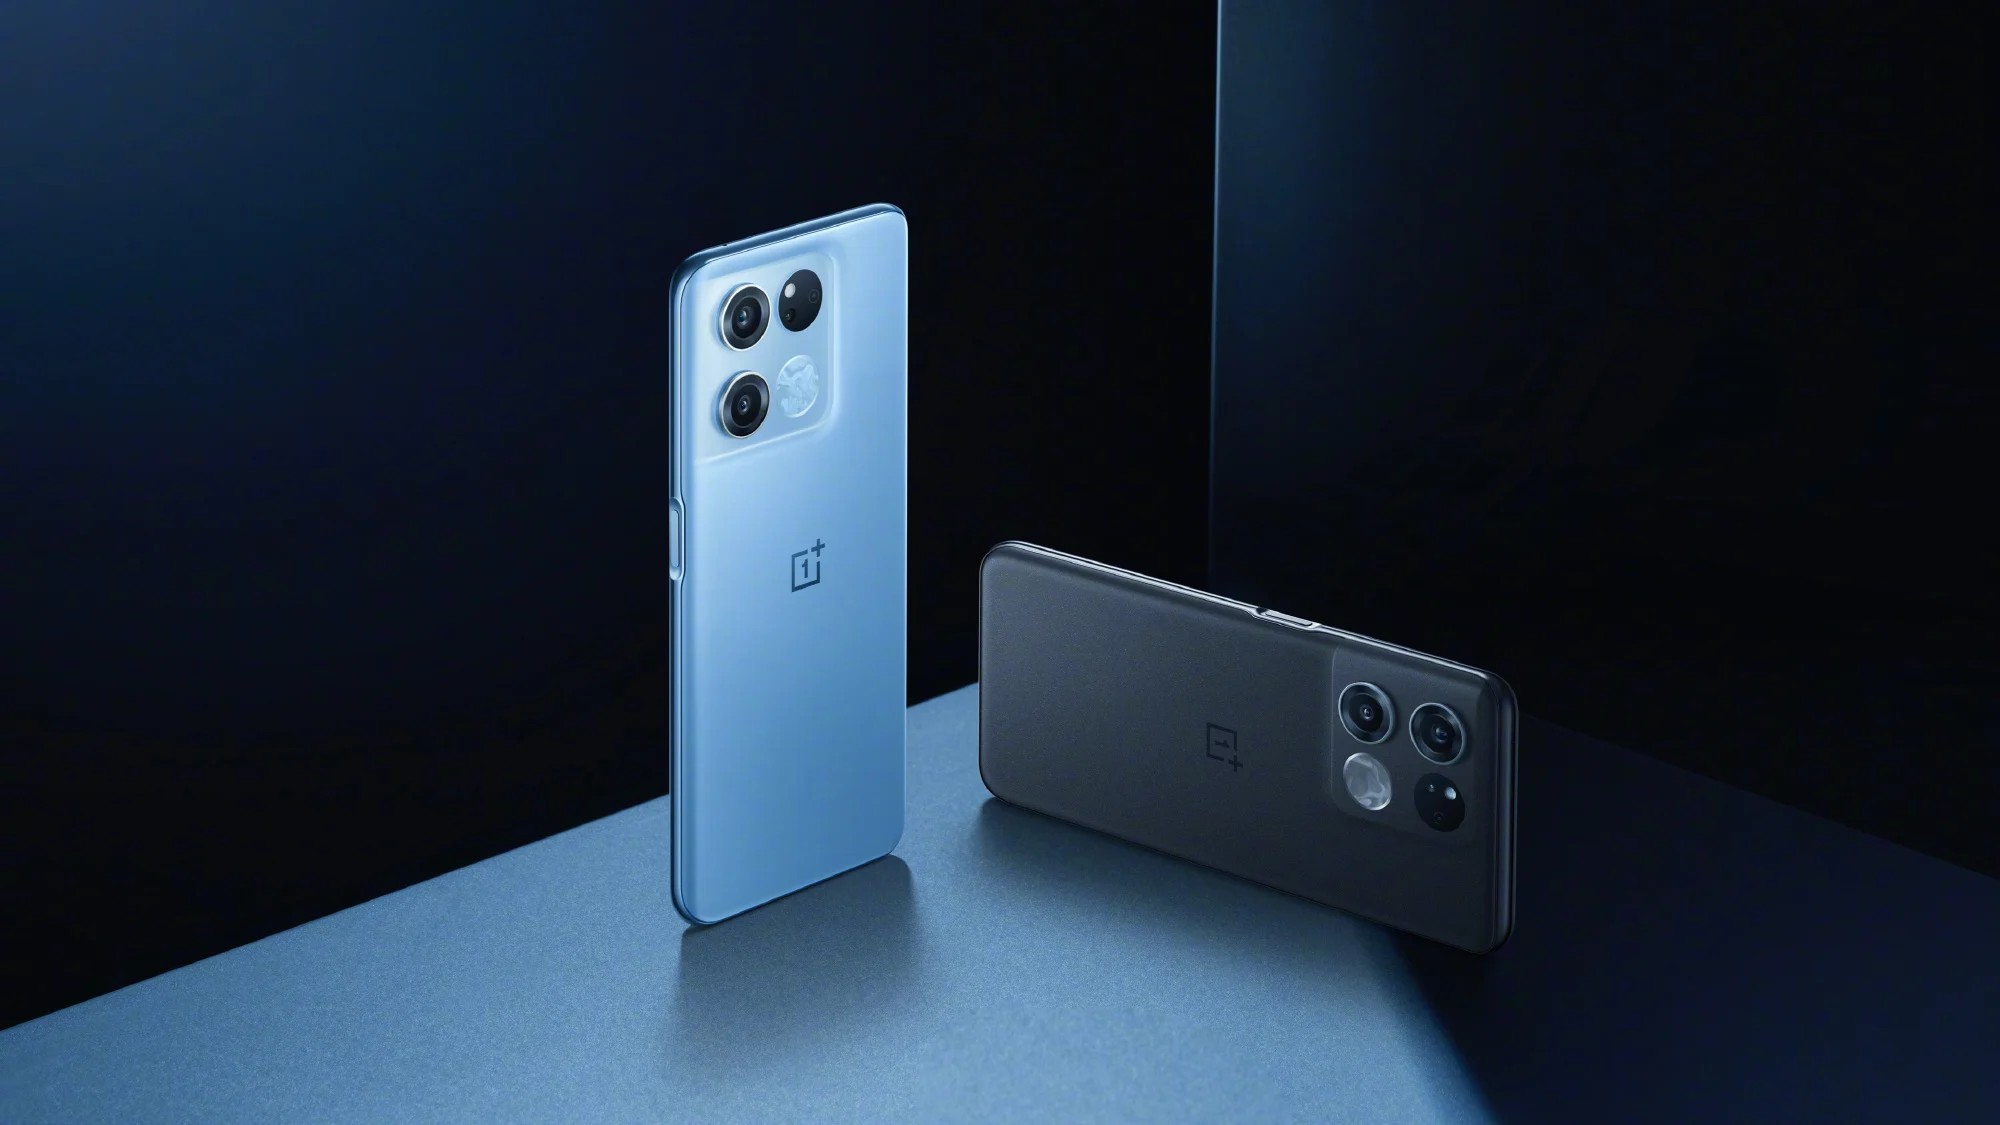 OnePlus Releases Ace 2 Pro, Starting at A Price of $411 - Pandaily